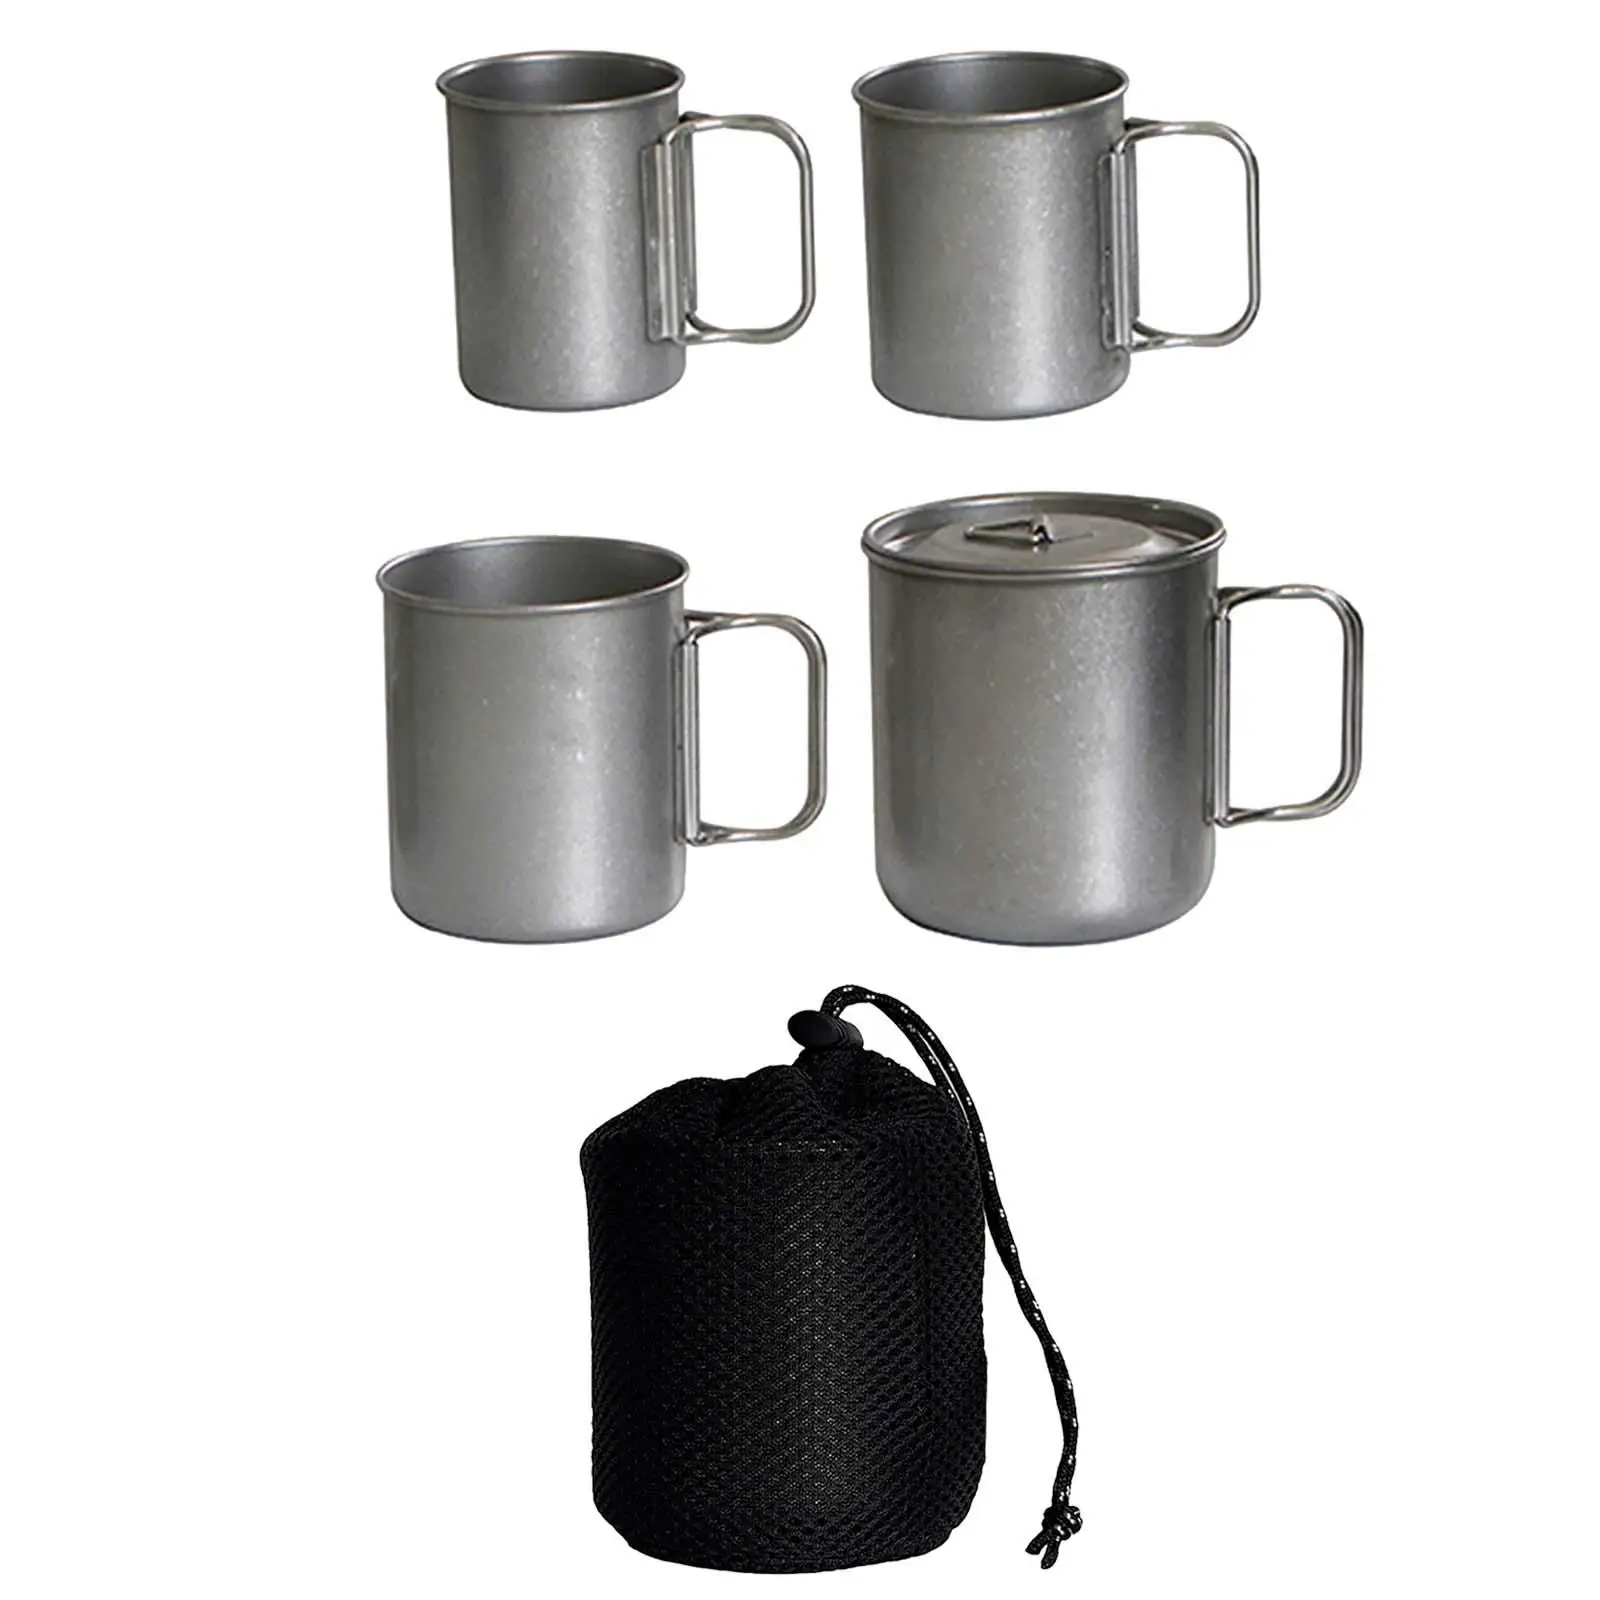 

4x Tea Coffee Mugs with Lid Lightweight 750ml Teapot Camping Cup Pot Water Cup Mug for Travel Campfire Backpacking Picnic Hiking